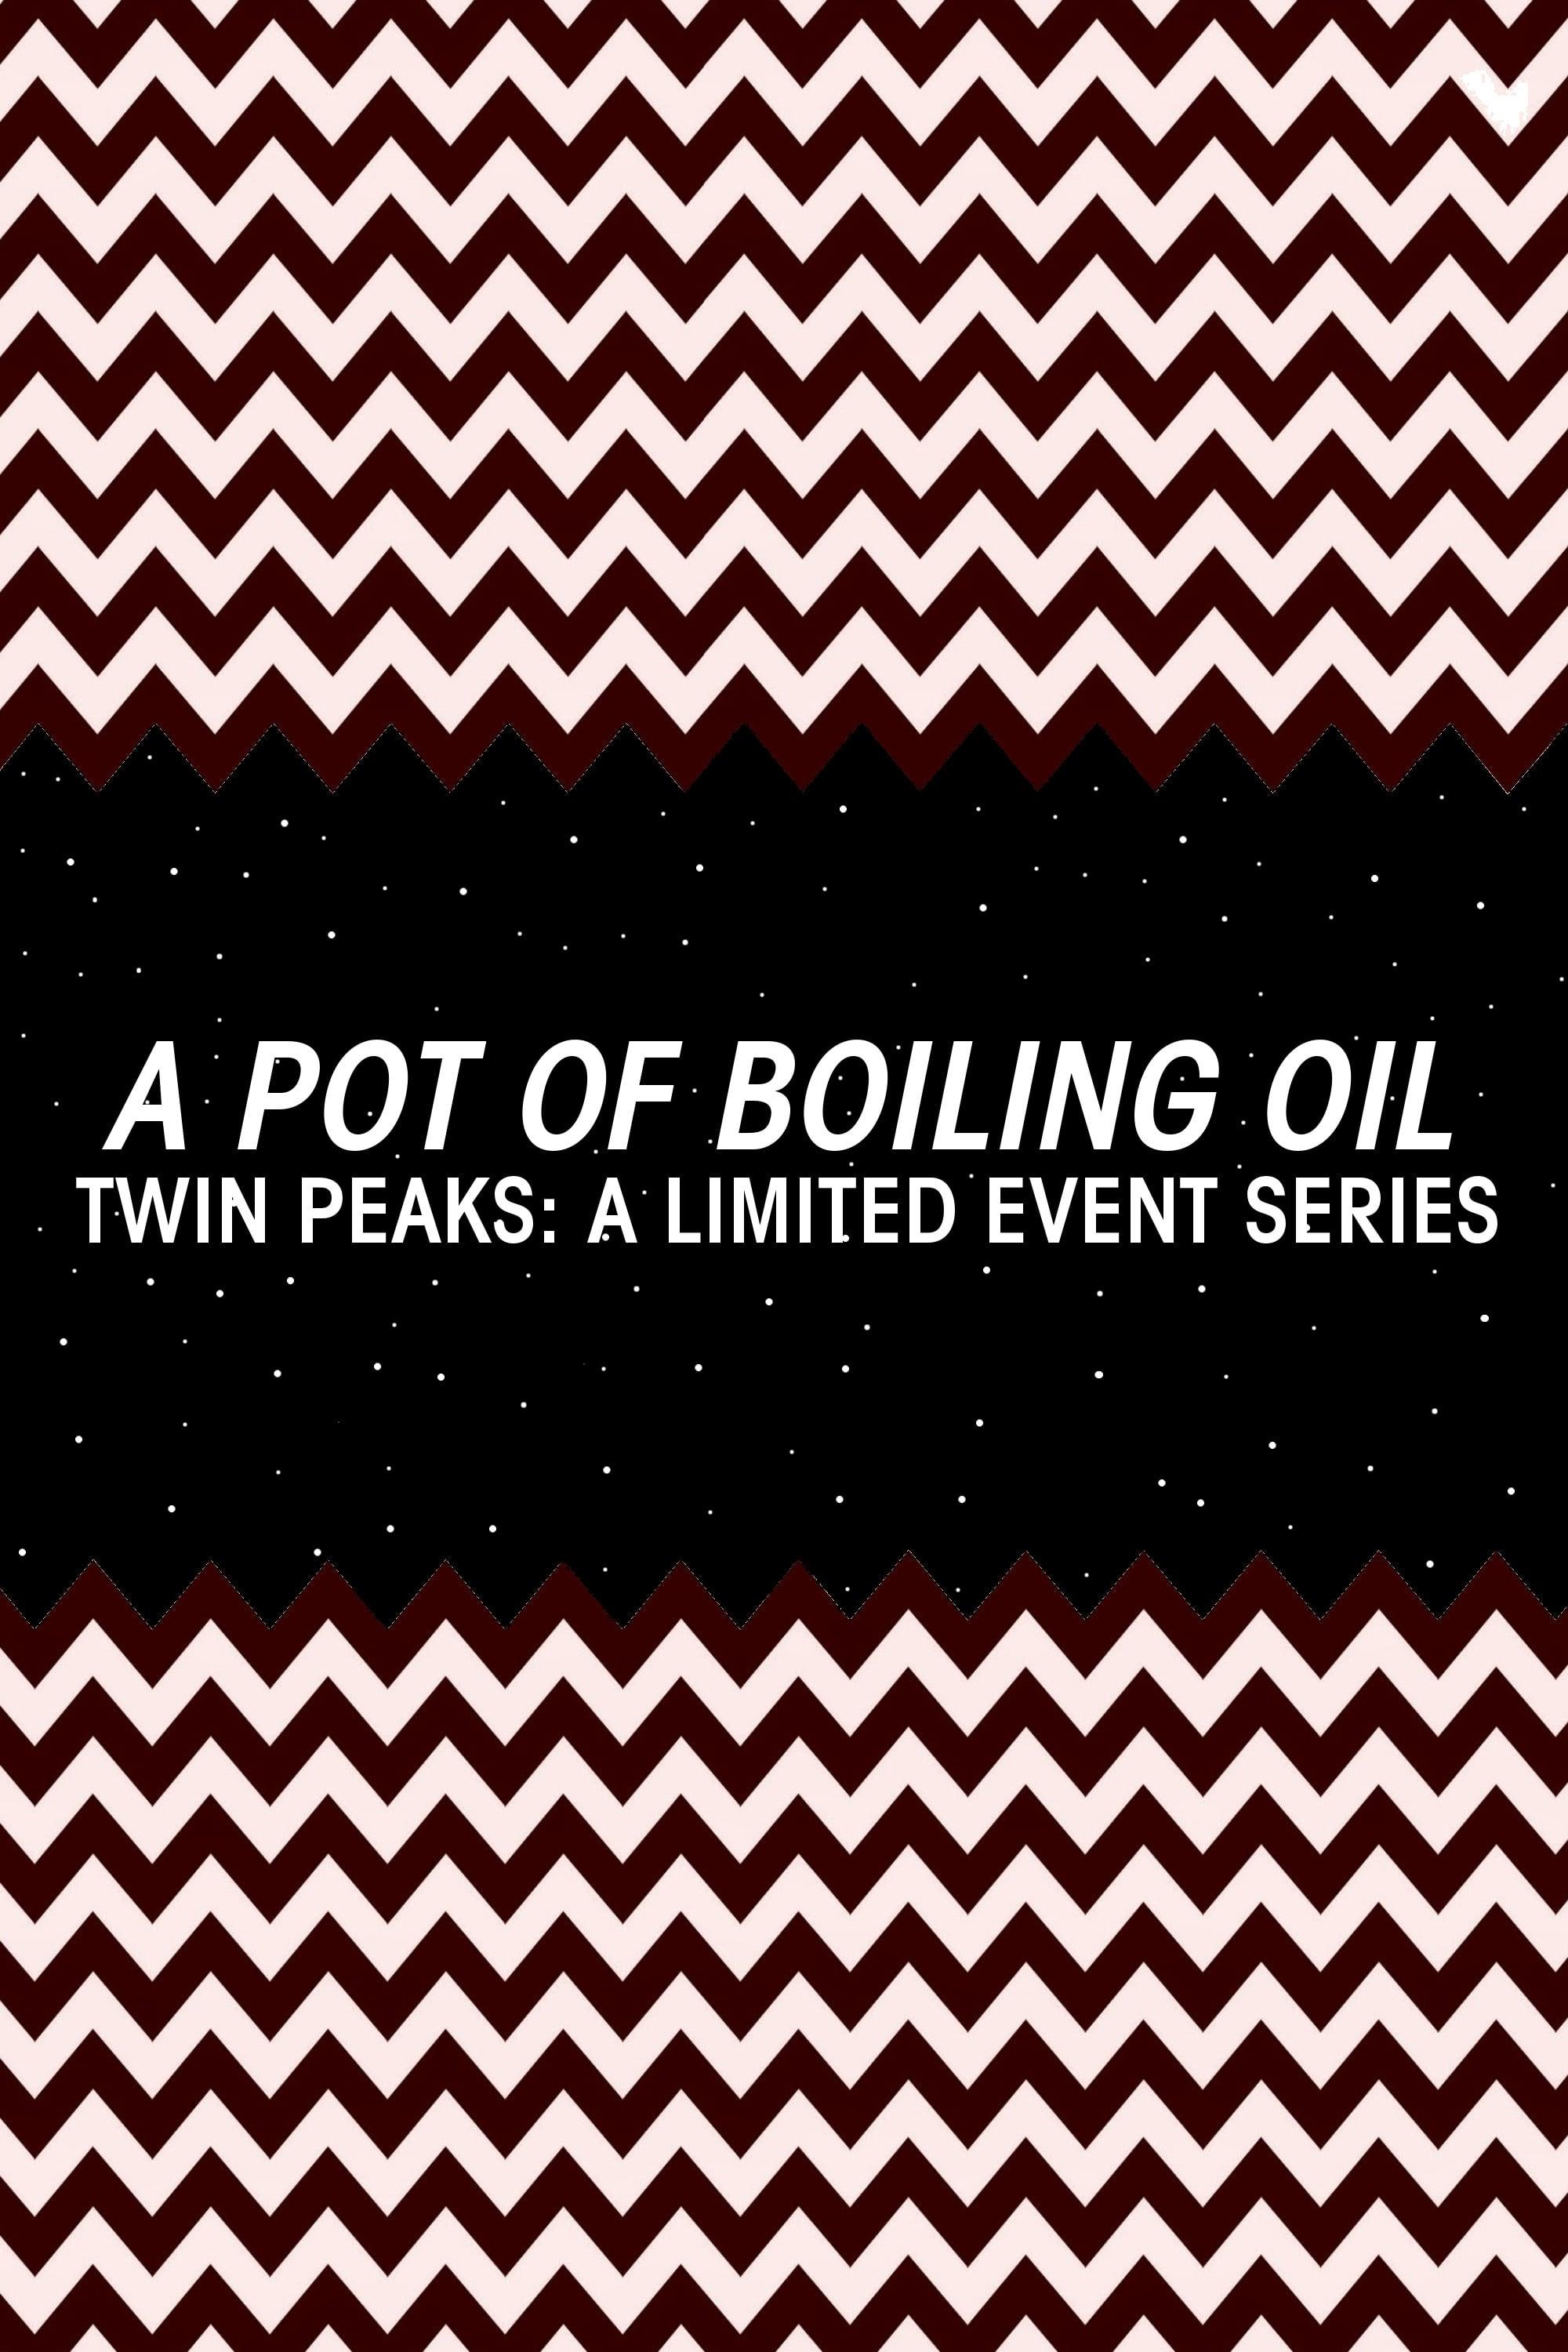 A Pot of Boiling Oil poster